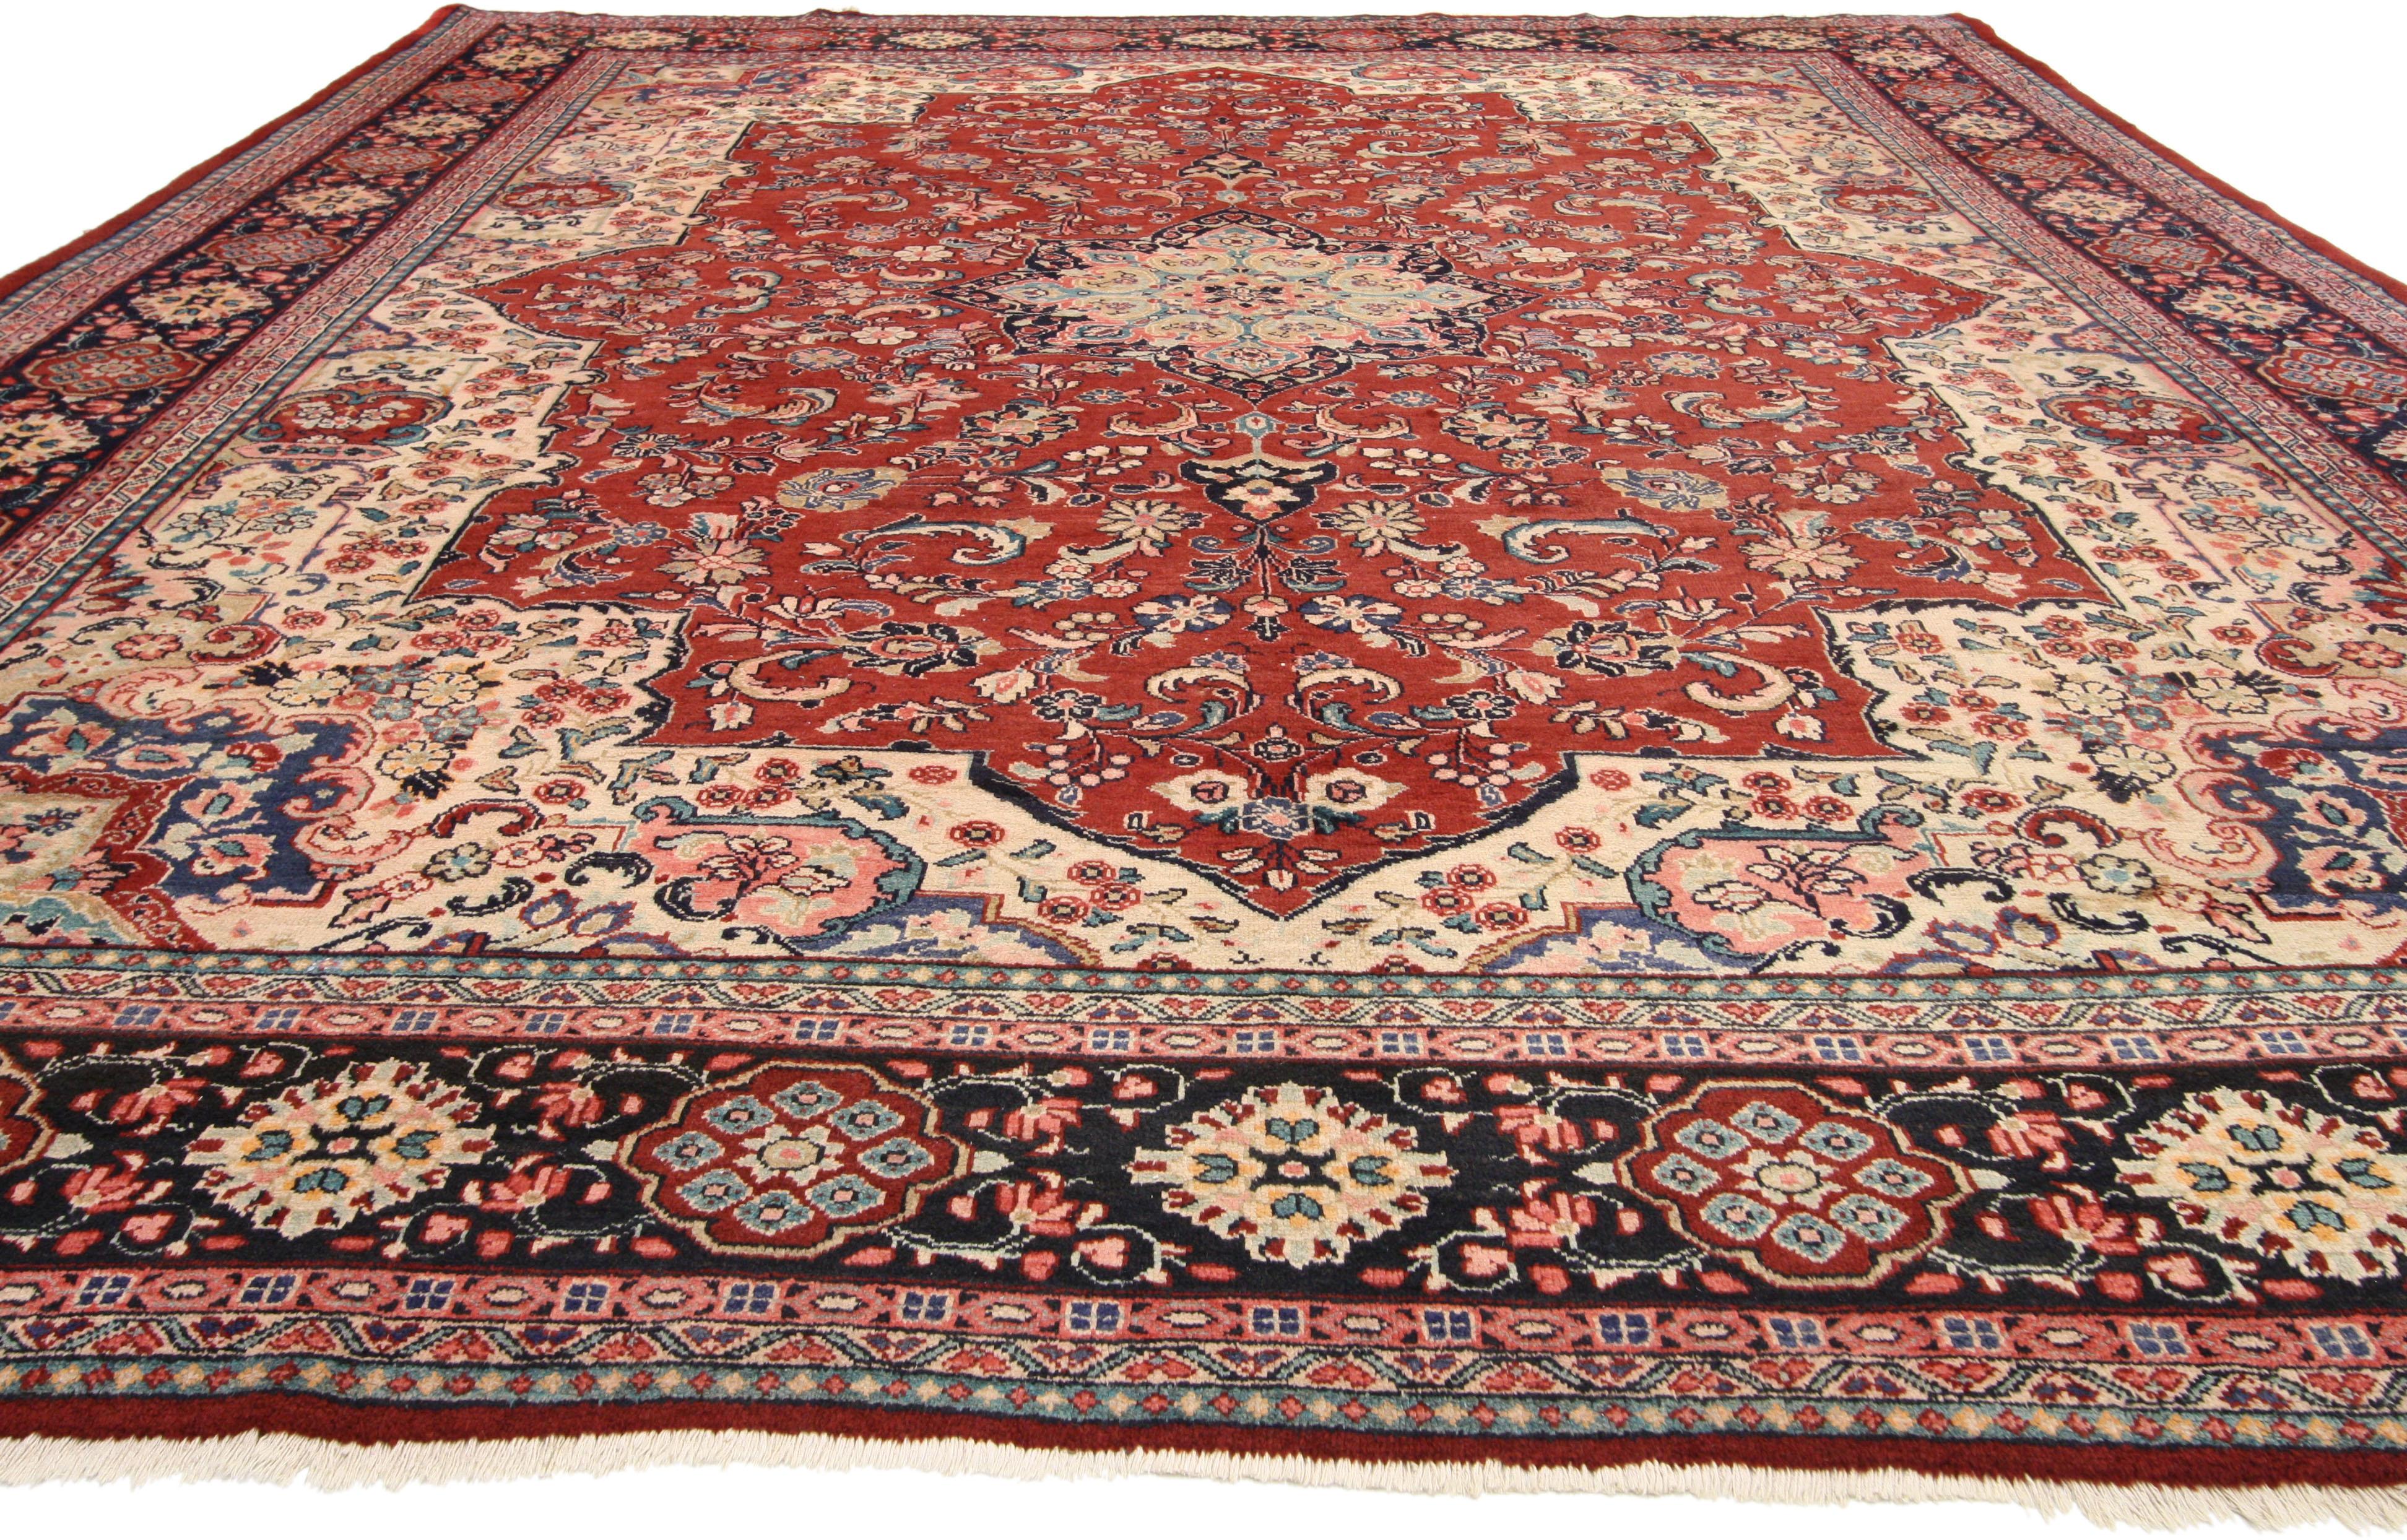 Romantic Vintage Persian Mahal Rug with Old World French Victorian Style